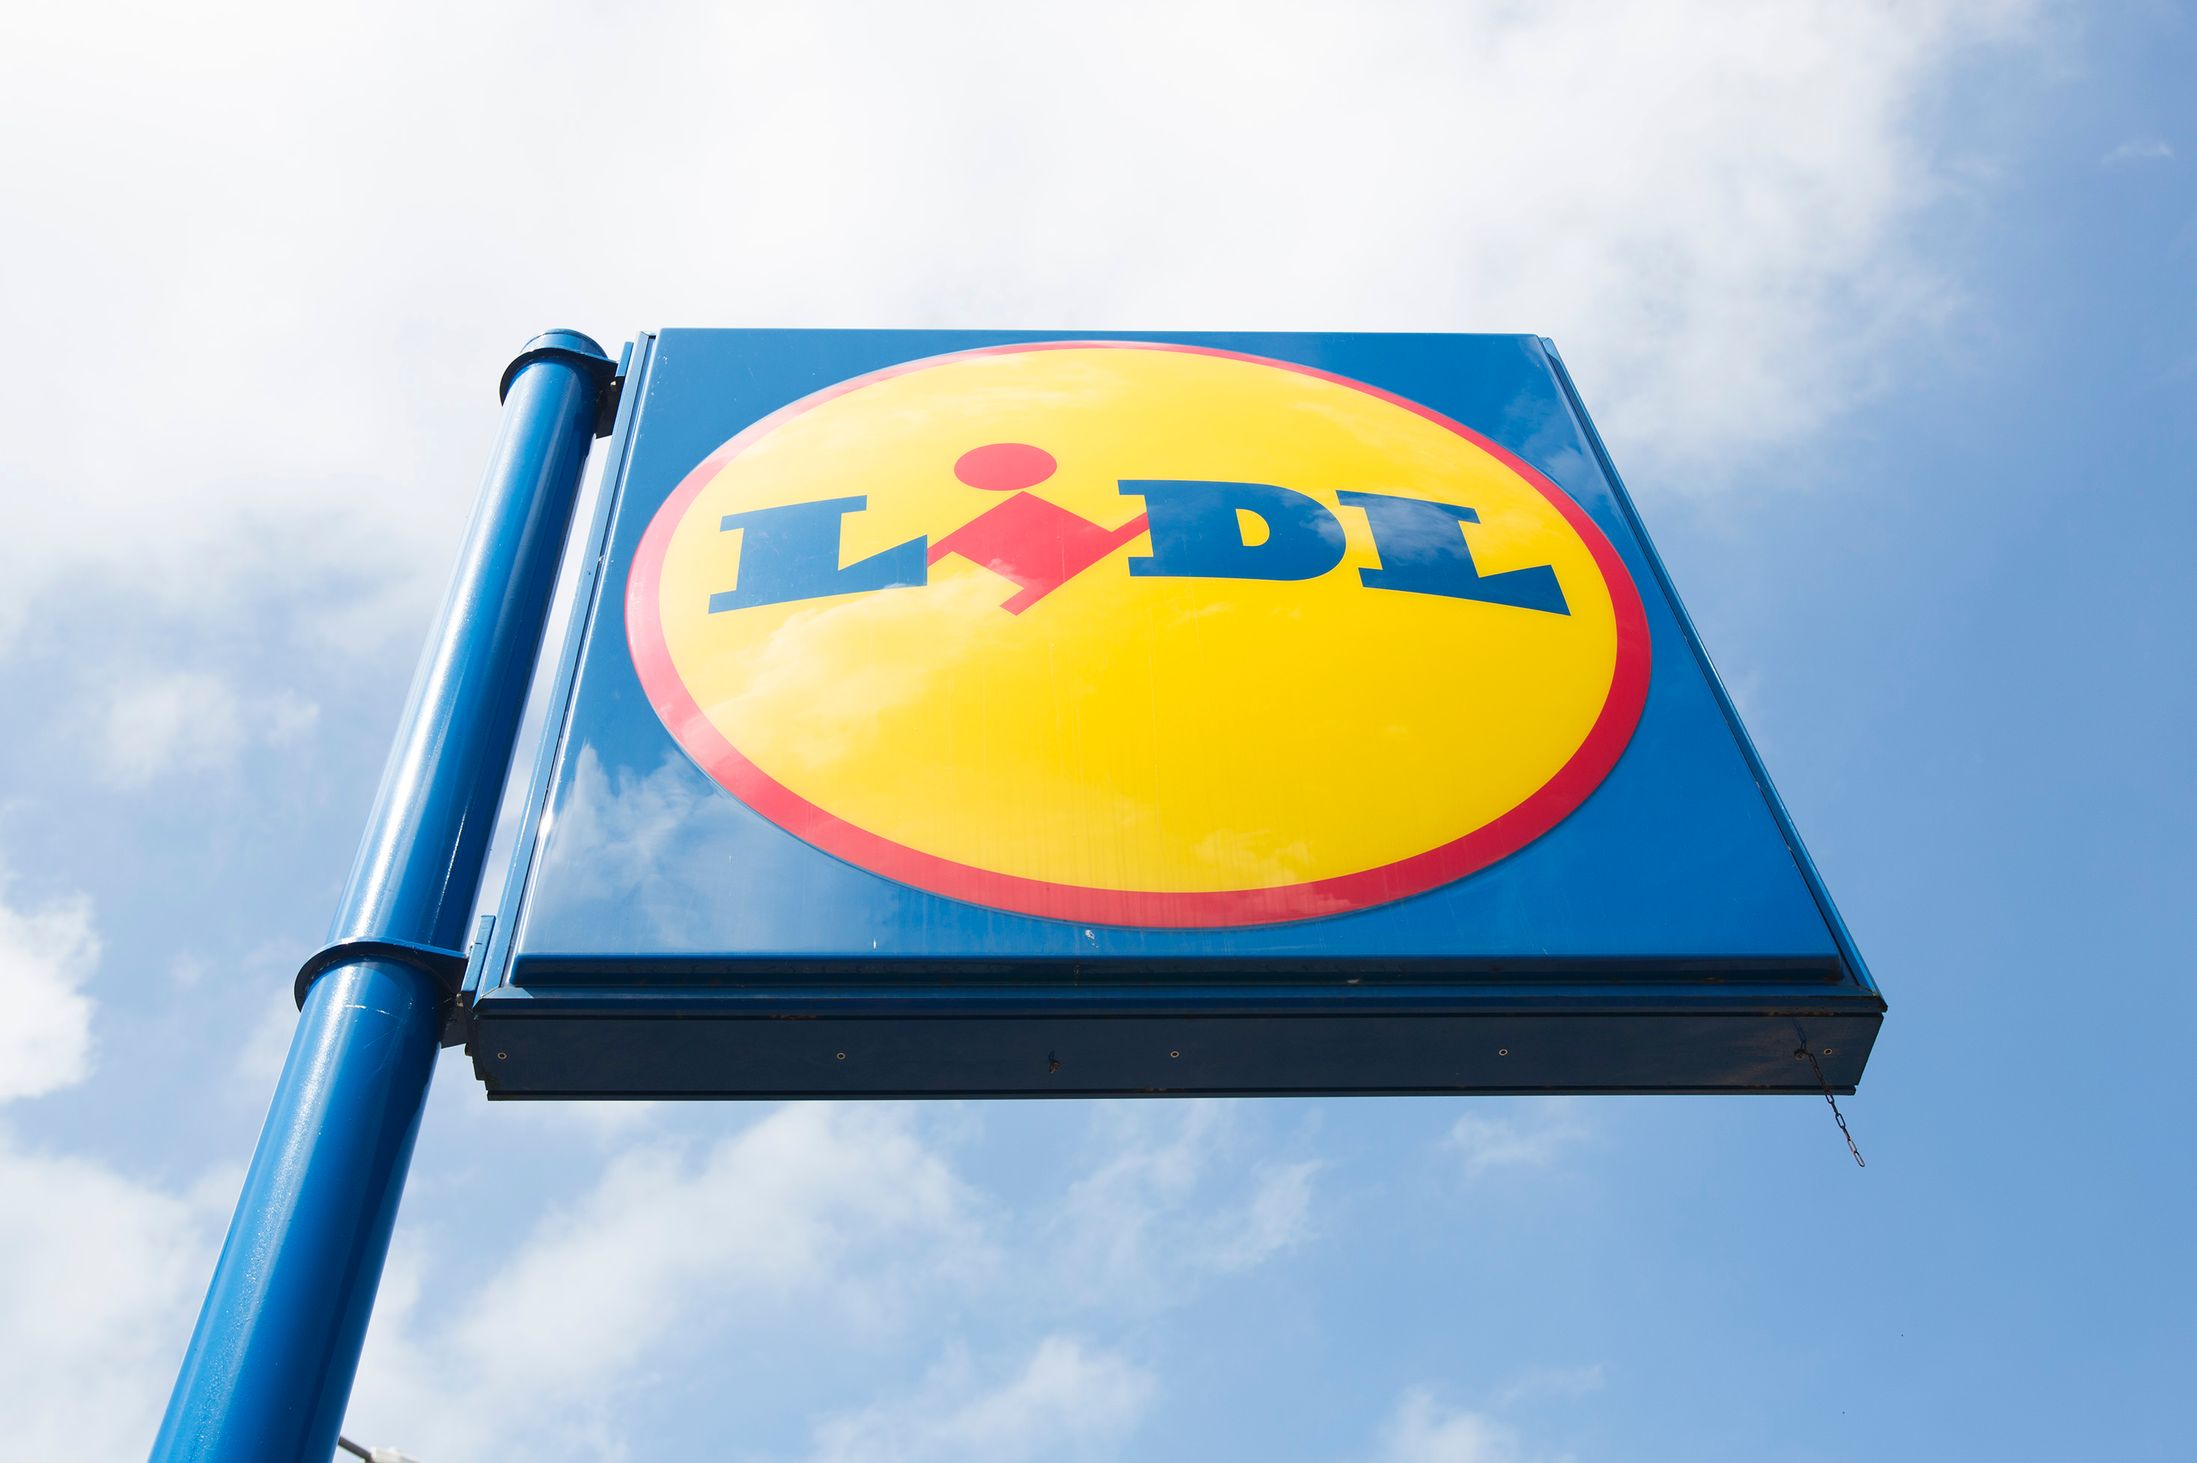 Lidl has become the latest retailer to decide a ban on caged eggs from 2025